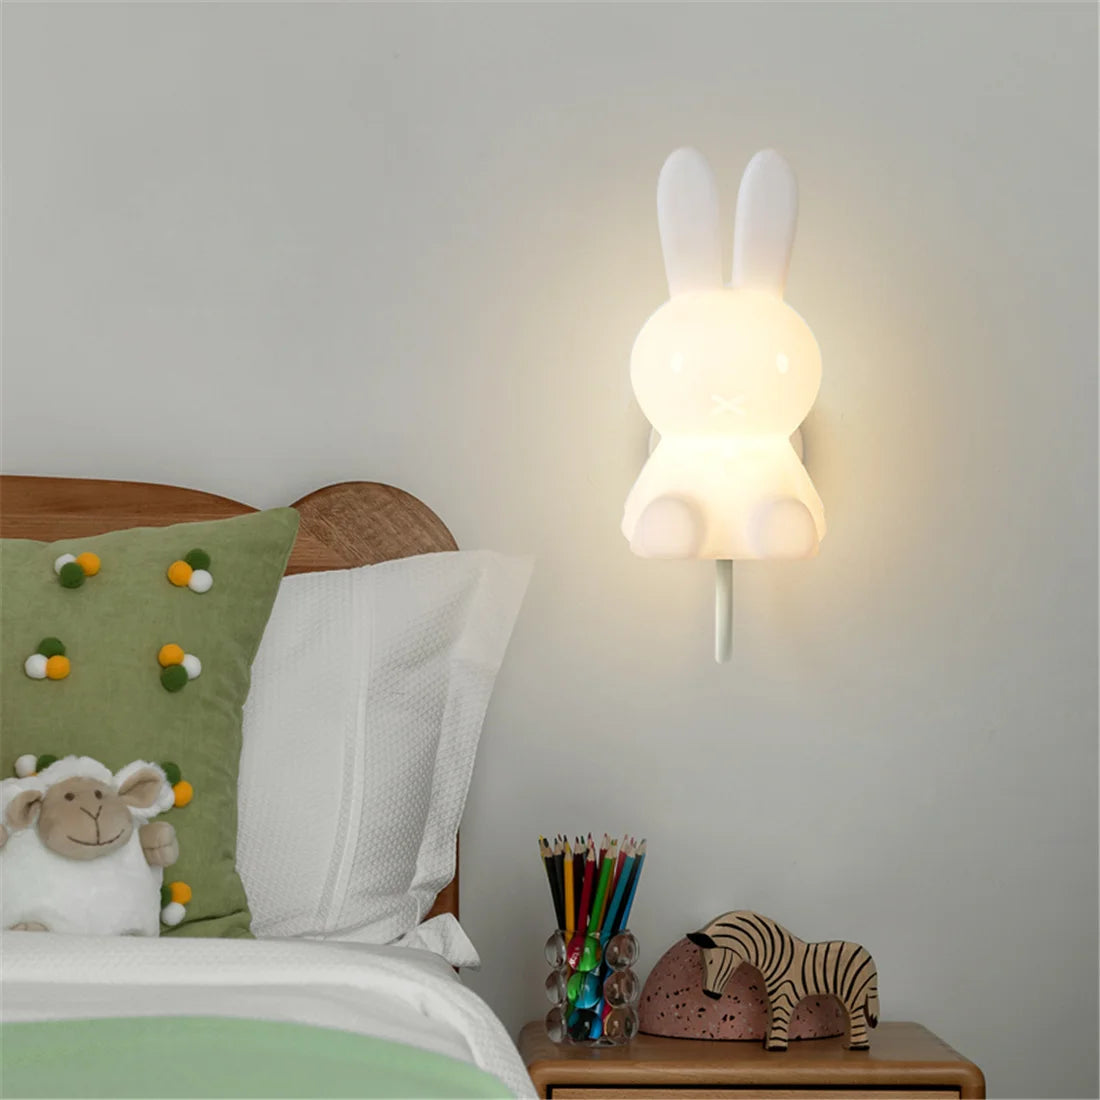 Cartoon Rabbit Kids Bedroom LED Wall Lamp – Home Decoration for Corridor, Stairs, Bedside, Living Room Sconces, Baby Sleeping Night Lights